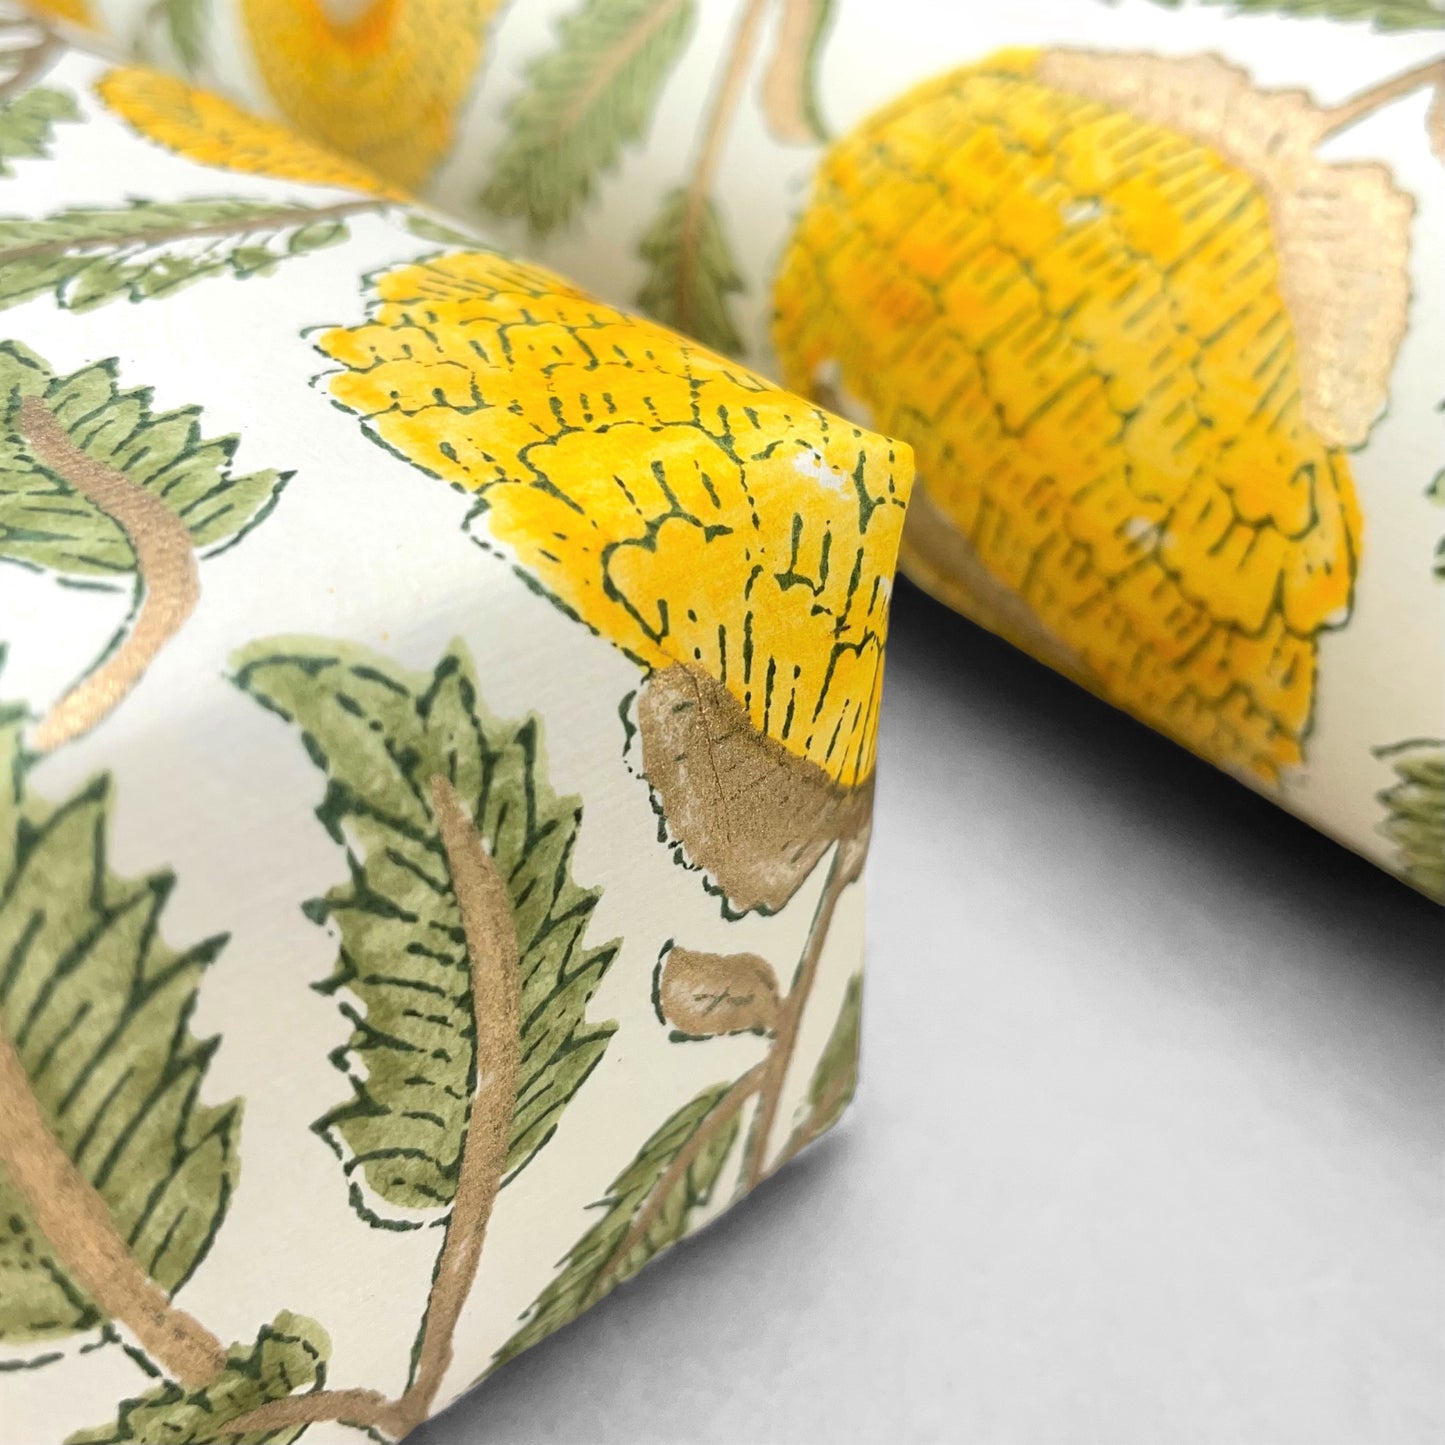 wrapping paper with repeat botanical pattern in yellow, gold and green by Paper Mirchi